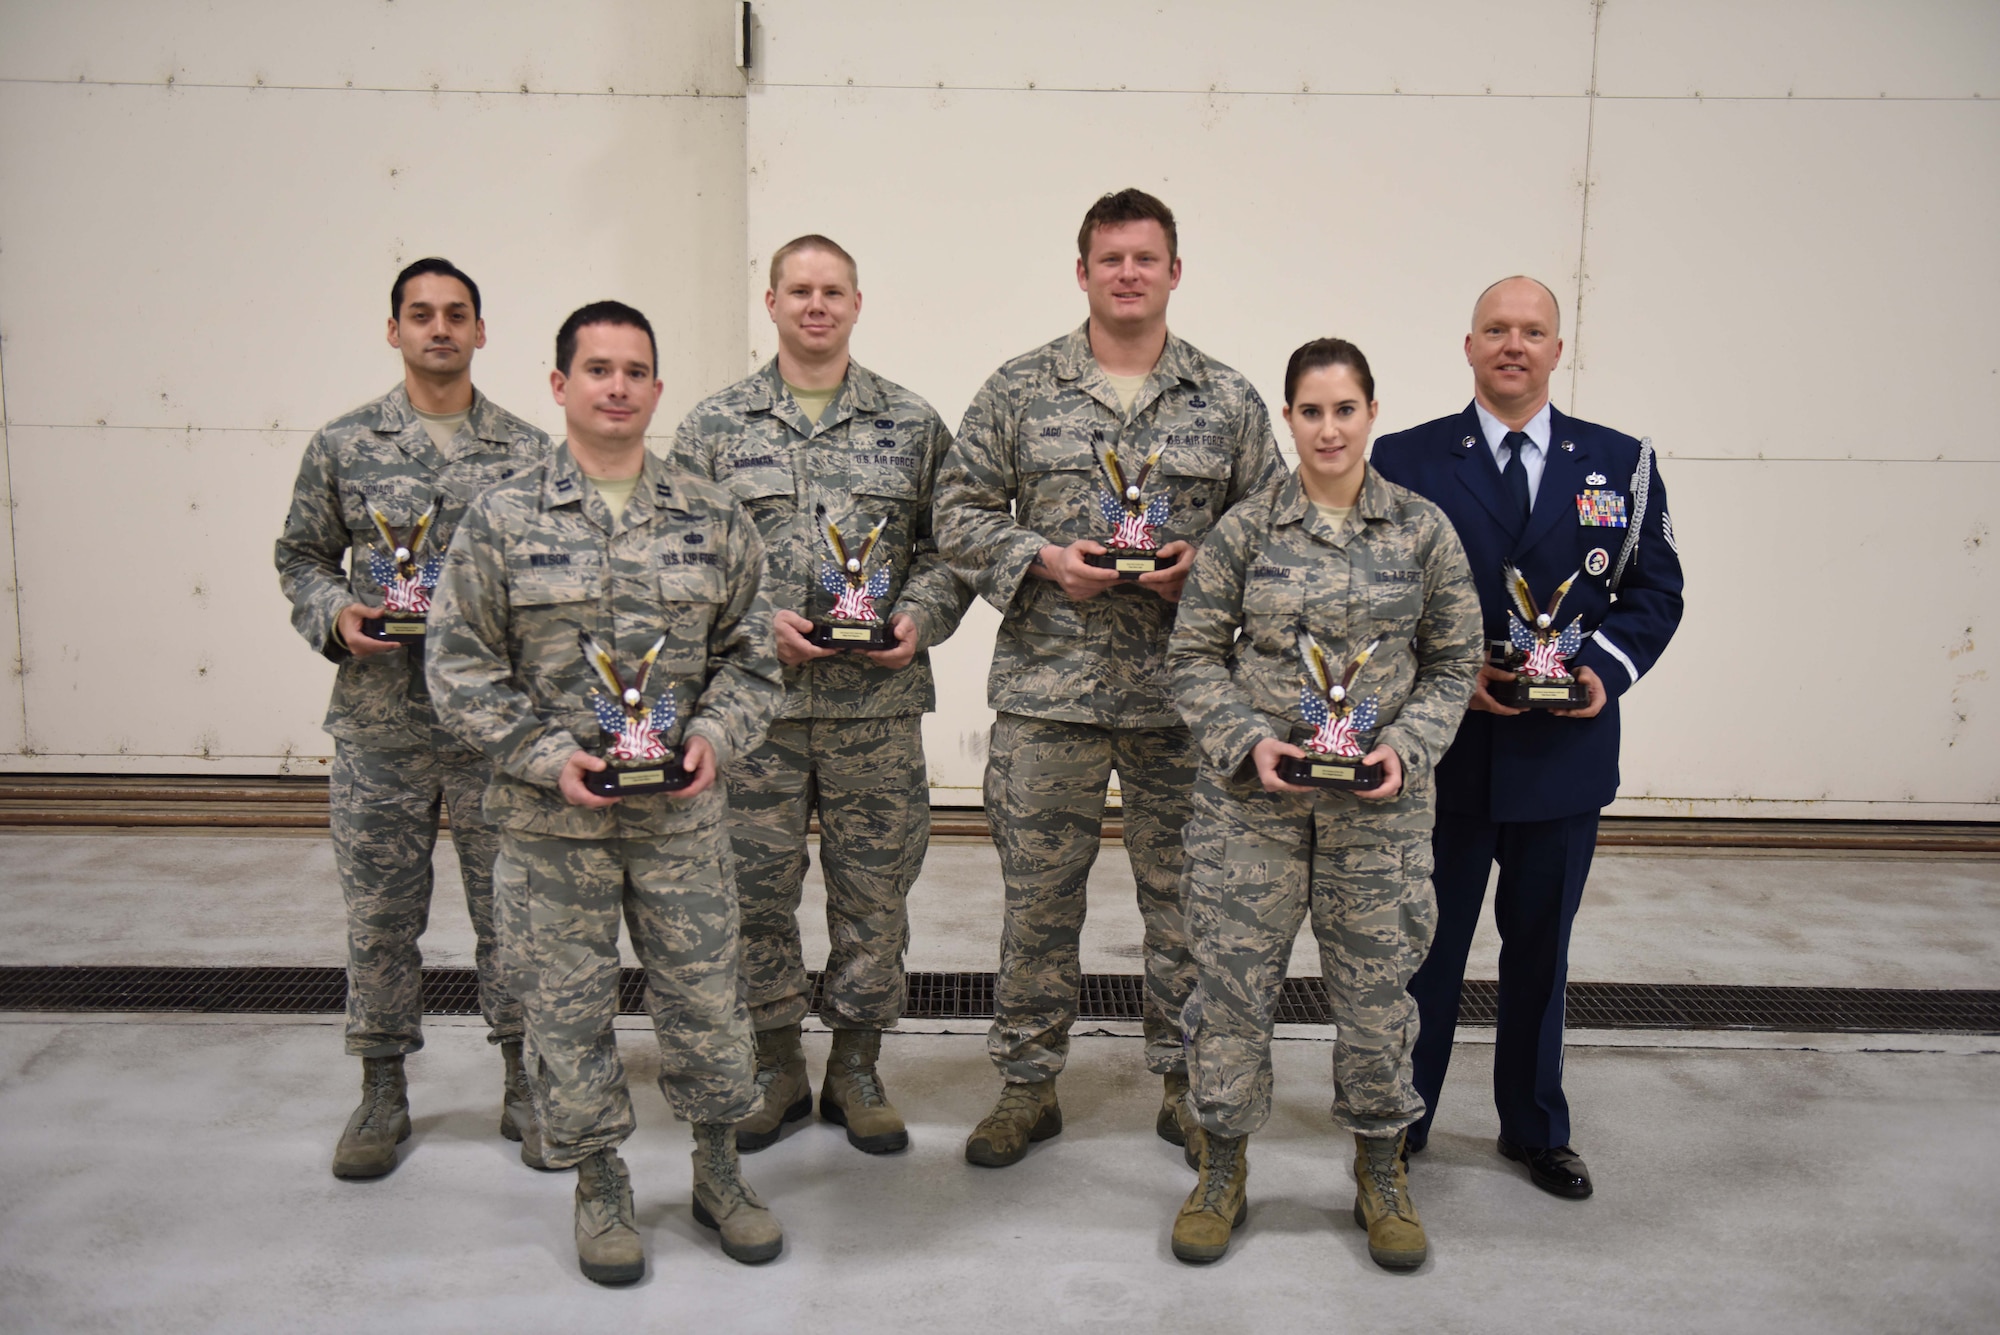 Master Sgt. Jason Maldonado, Capt. Colin Wilson, Master Sgt. Paul Wagaman, Tech. Sgt. Brent David Miller, Tech. Sgt. Ethan Jago, Senior Airman Abigail Buonomo (left to right), members of the 193rd Special Operations Wing, Middletown, Pennsylvania, receive their Airmen of the Year Awards Dec. 18, during the wing’s annual awards ceremony. The awards were earned for outstanding performance and leadership that impact the wing’s mission but also support fellow Airman associated with the Air National Guard. (U.S. Air National Guard photo by Senior Airman Ethan Carl/Released)